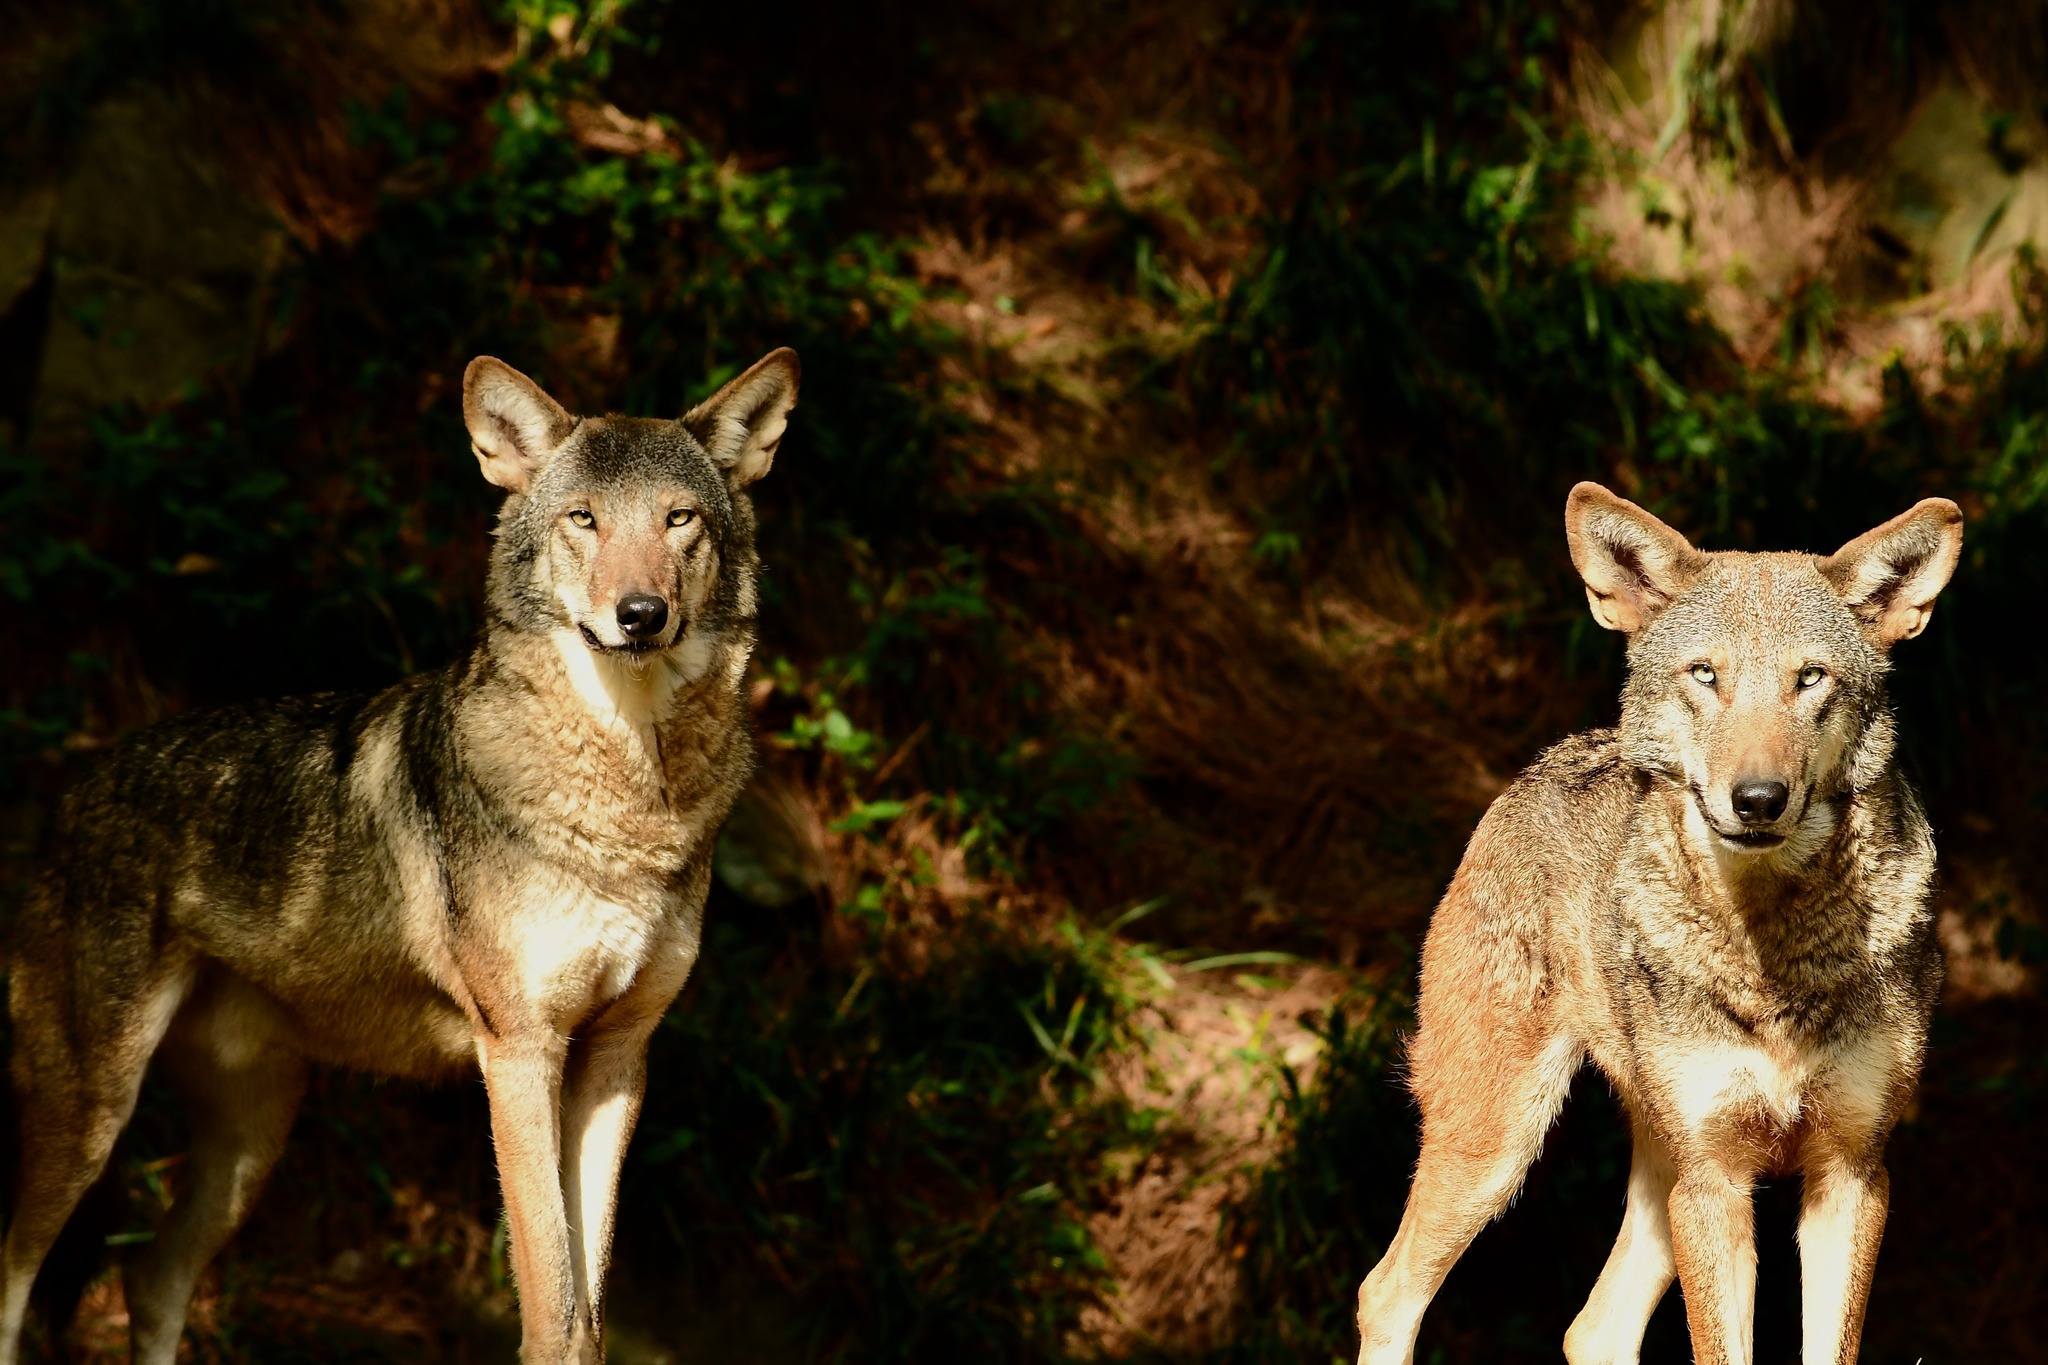 There are two new residents at the Red Wolf Center on Pocosin Lakes National Wildlife Refuge in Columbia, NC: 4-year-old red wolf brothers. Photo by Robert Wilcox, Durham Life and Science Museum